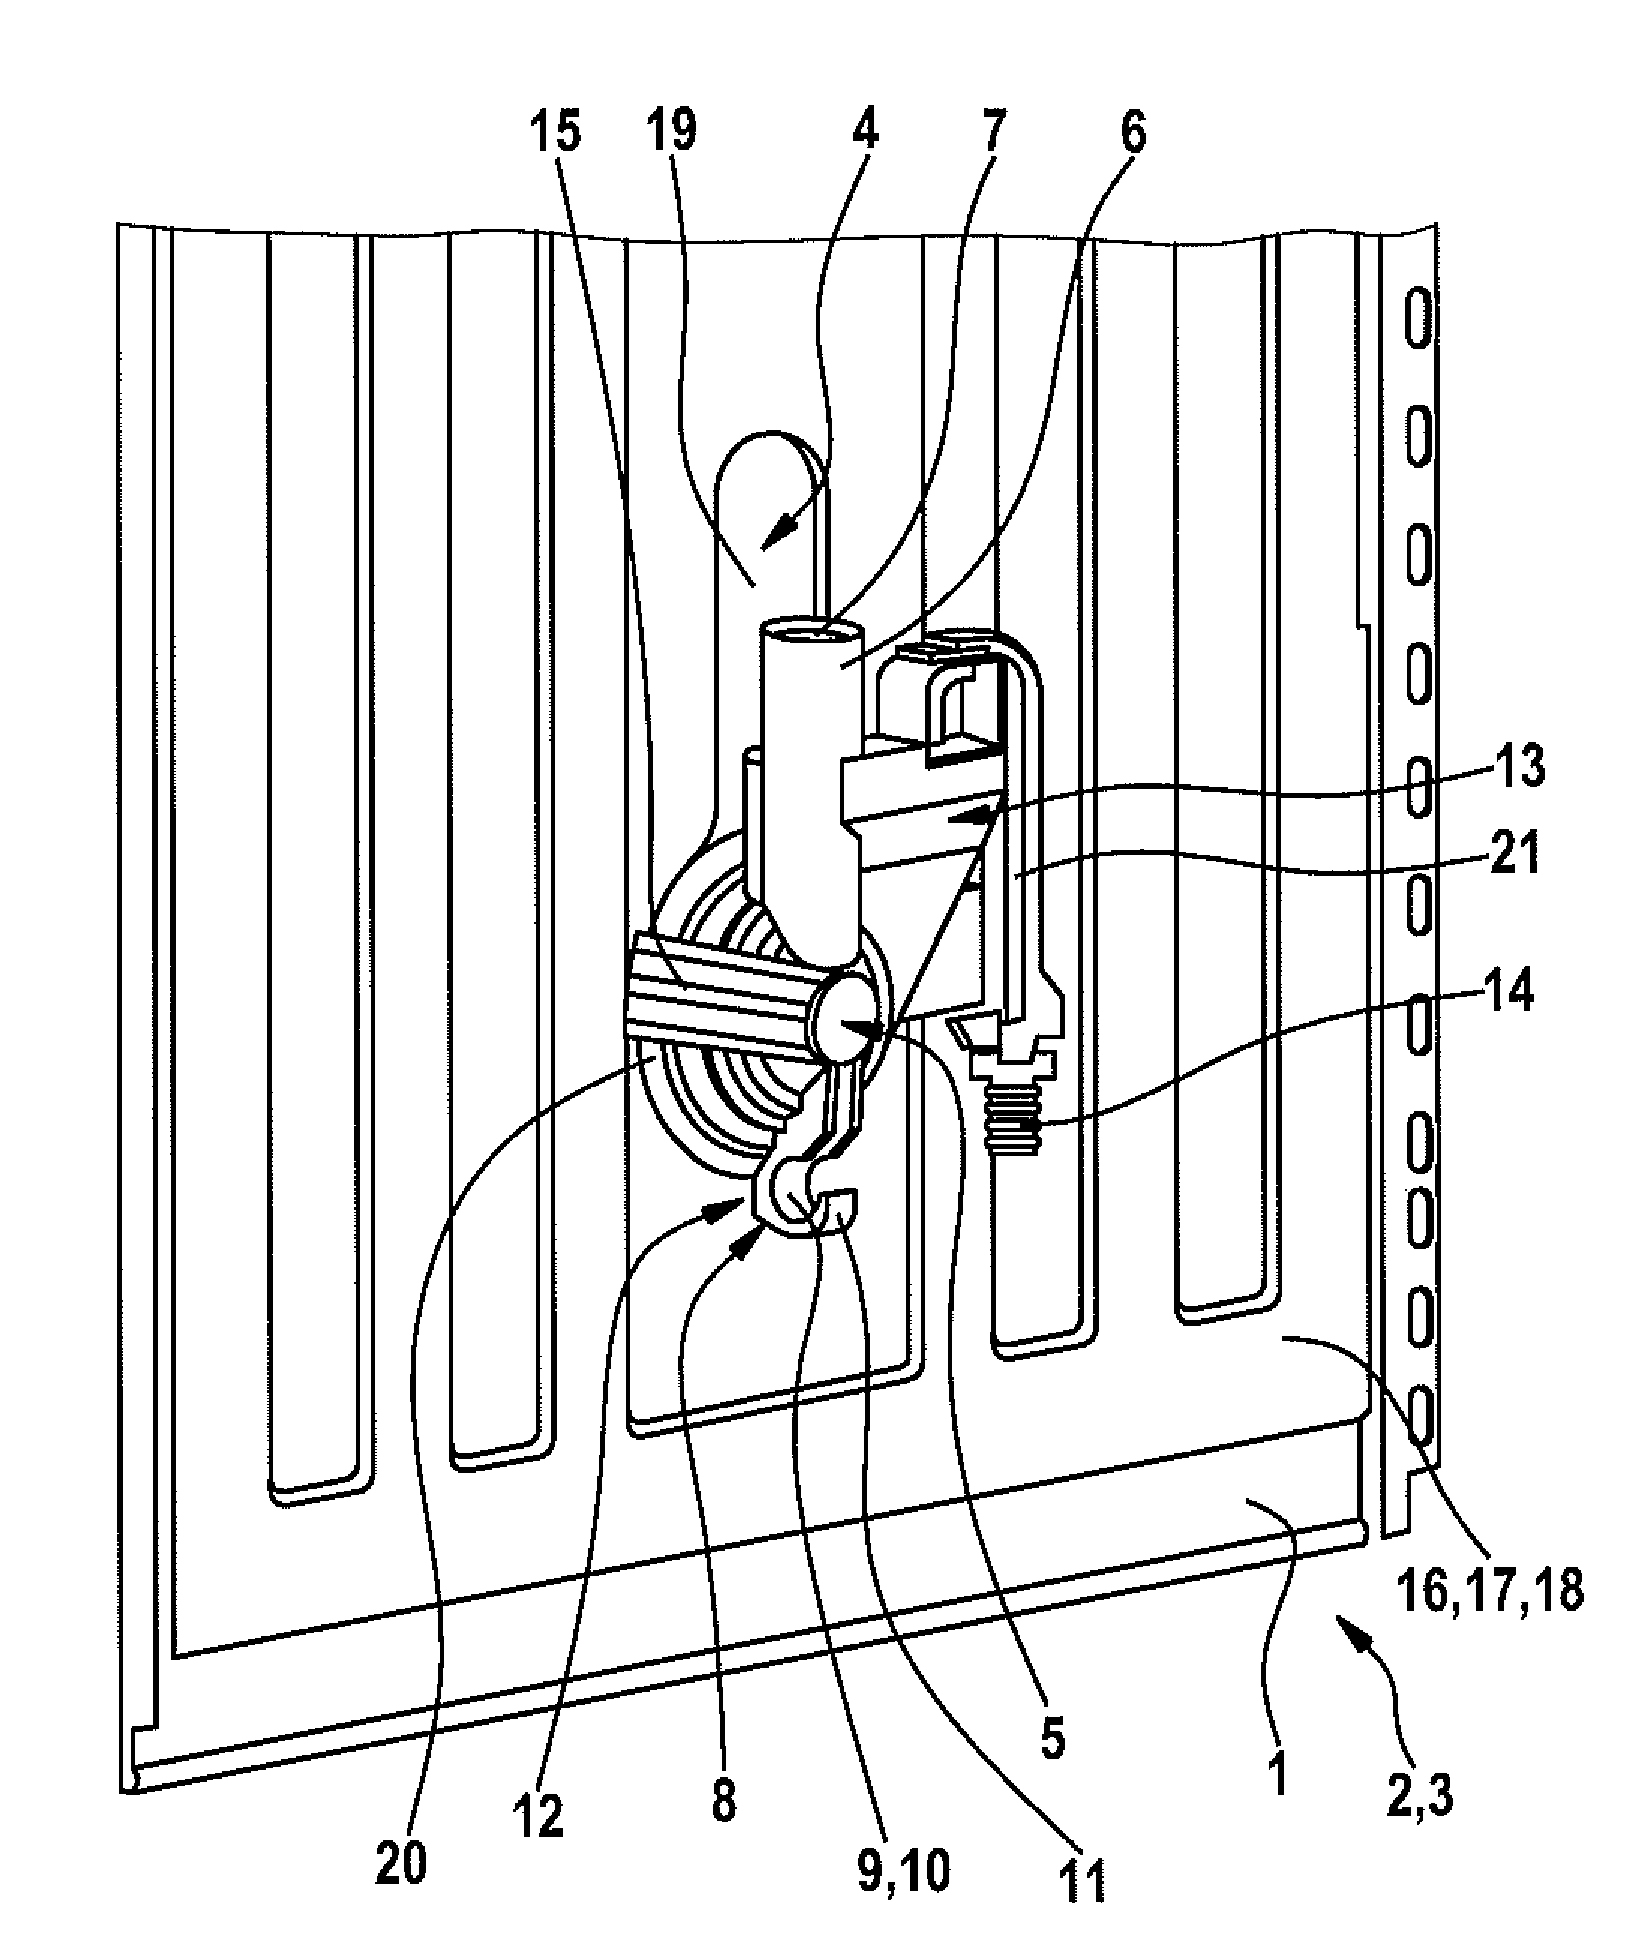 Water-conducting domestic appliance